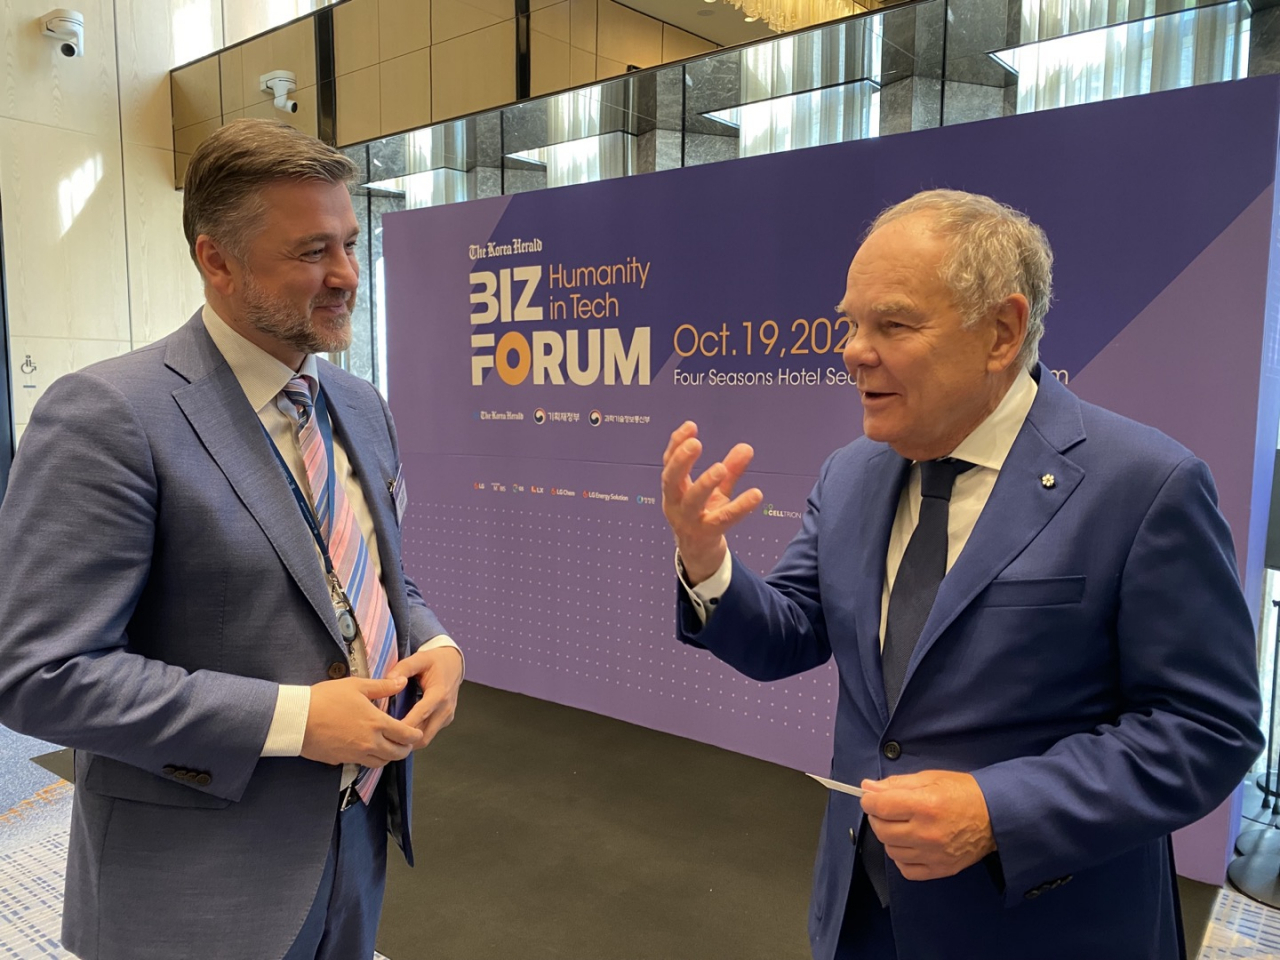 Estonian Ambassador to Korea Sten Schwede interacts with Don Tapscott -- executive chairman of the Blockchain Research Institute and author of global bestseller “Blockchain Revolution” at The Korea Herald Biz Forum on Wednesday at Four Seasons Hotel in Jung-gu, Seoul.